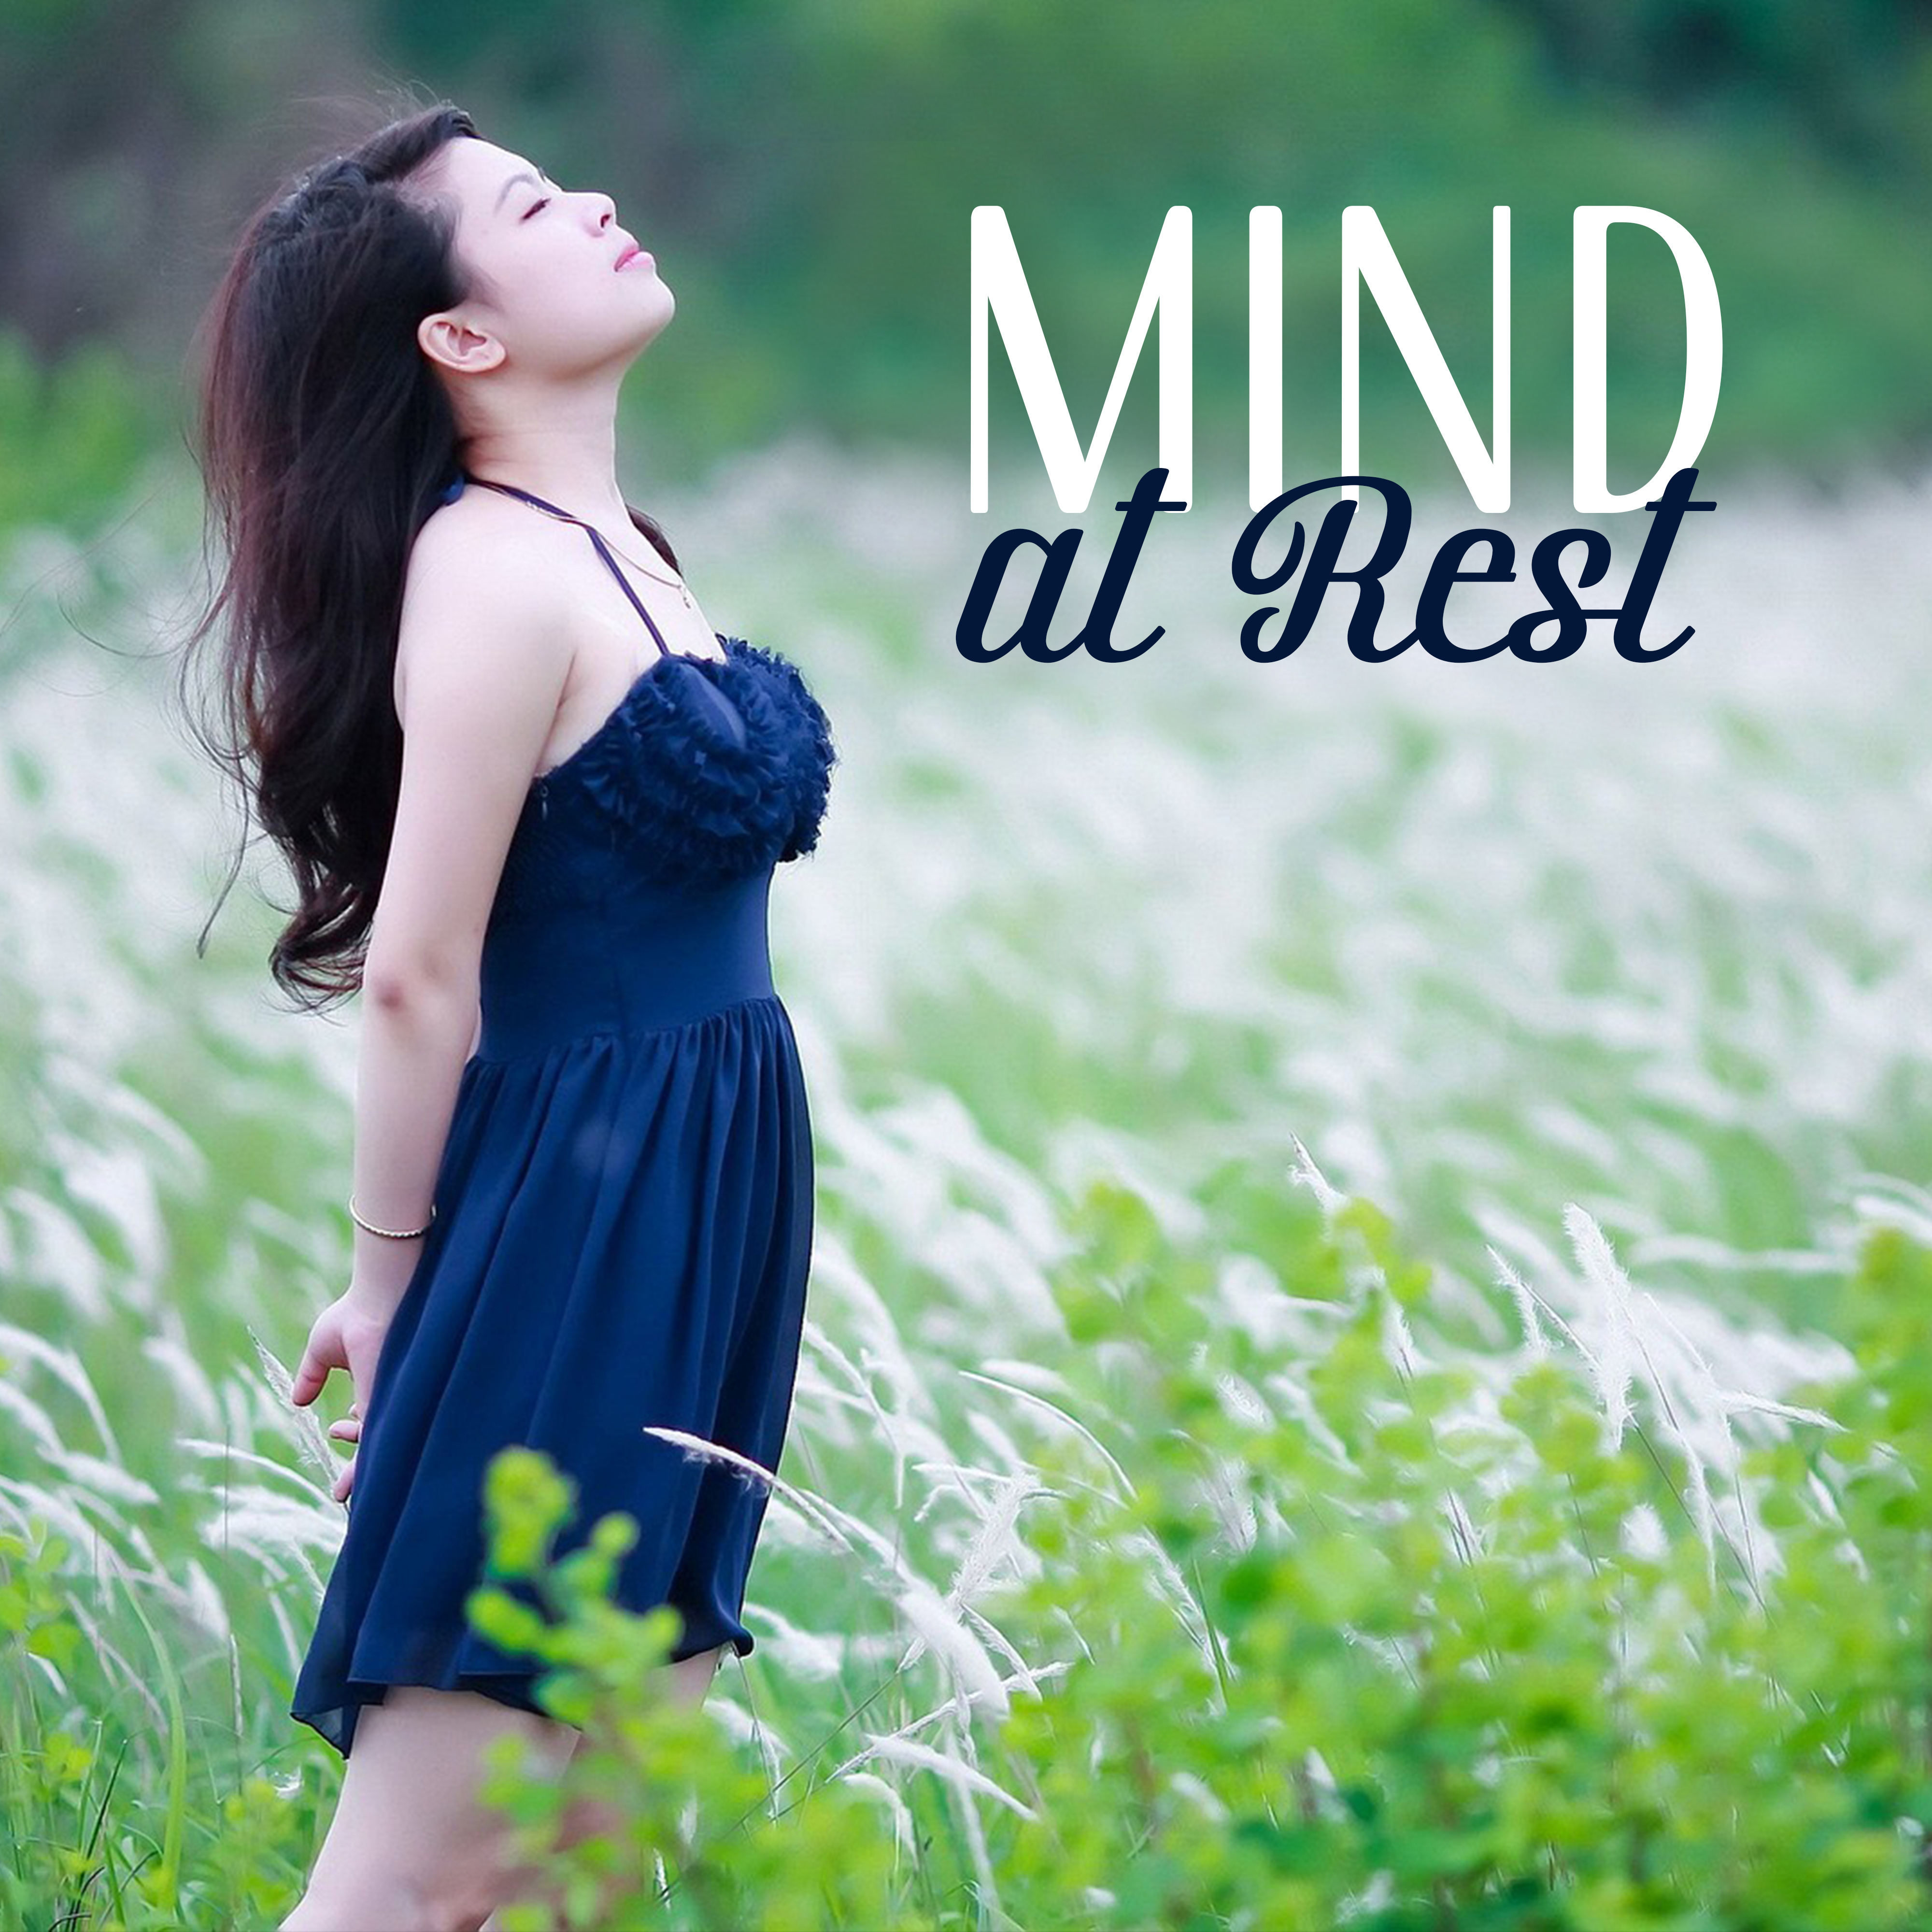 Mind at Rest – Relaxing Music Therapy, Nature Sounds, New Age for Relax, Bliss, Feel Zen Sensations